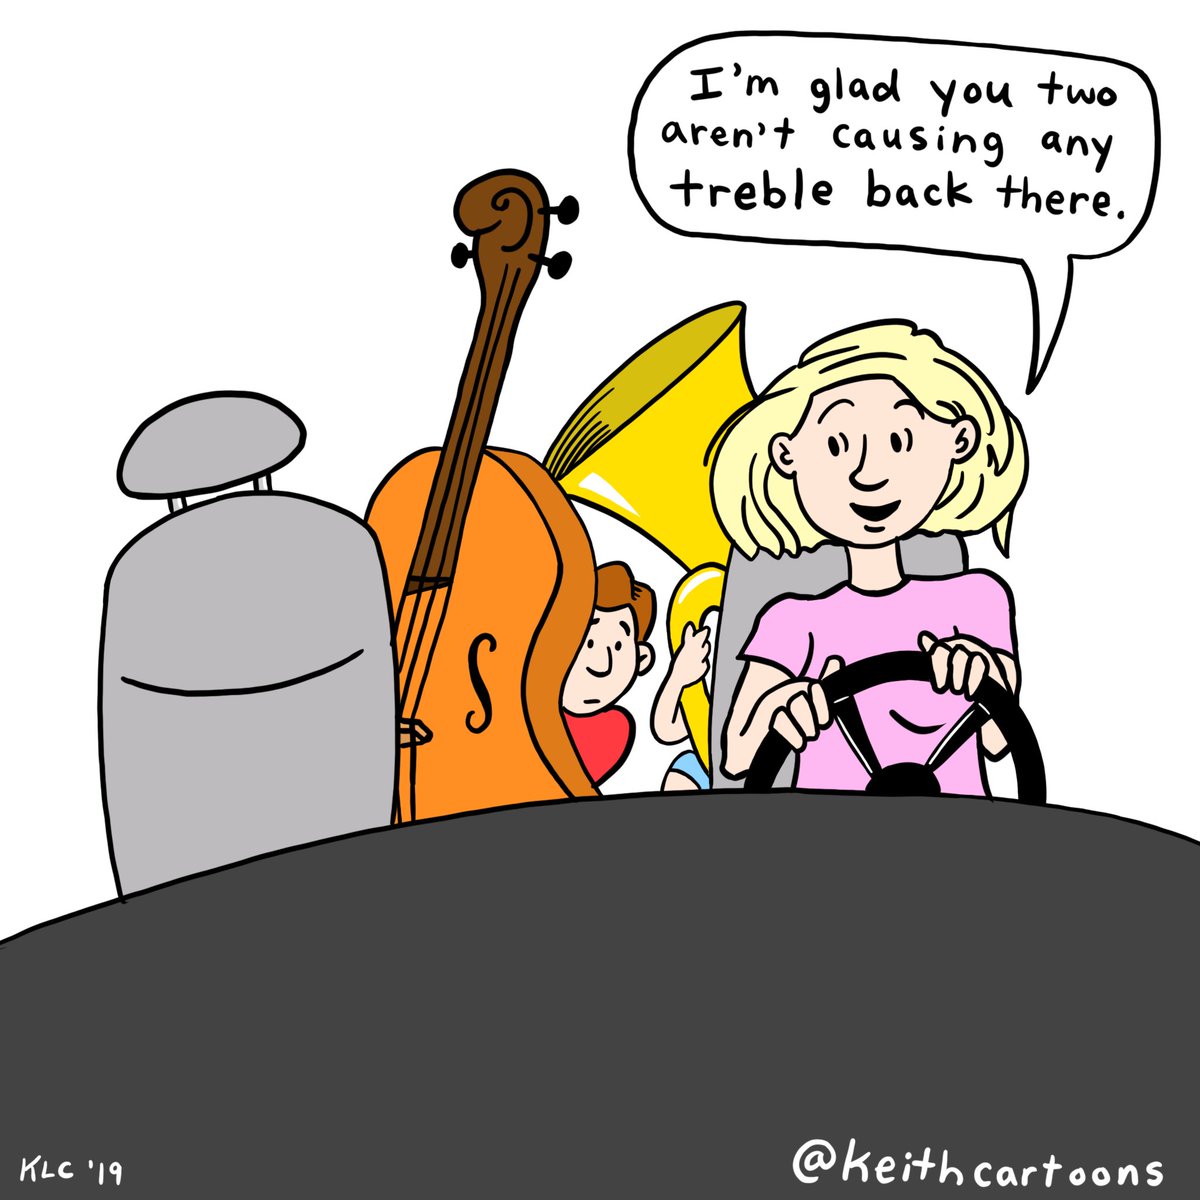 All I can say is, they must be in a convertible or have a really tall roof! #musicianhumor #uprightbass #tuba #dailycomic